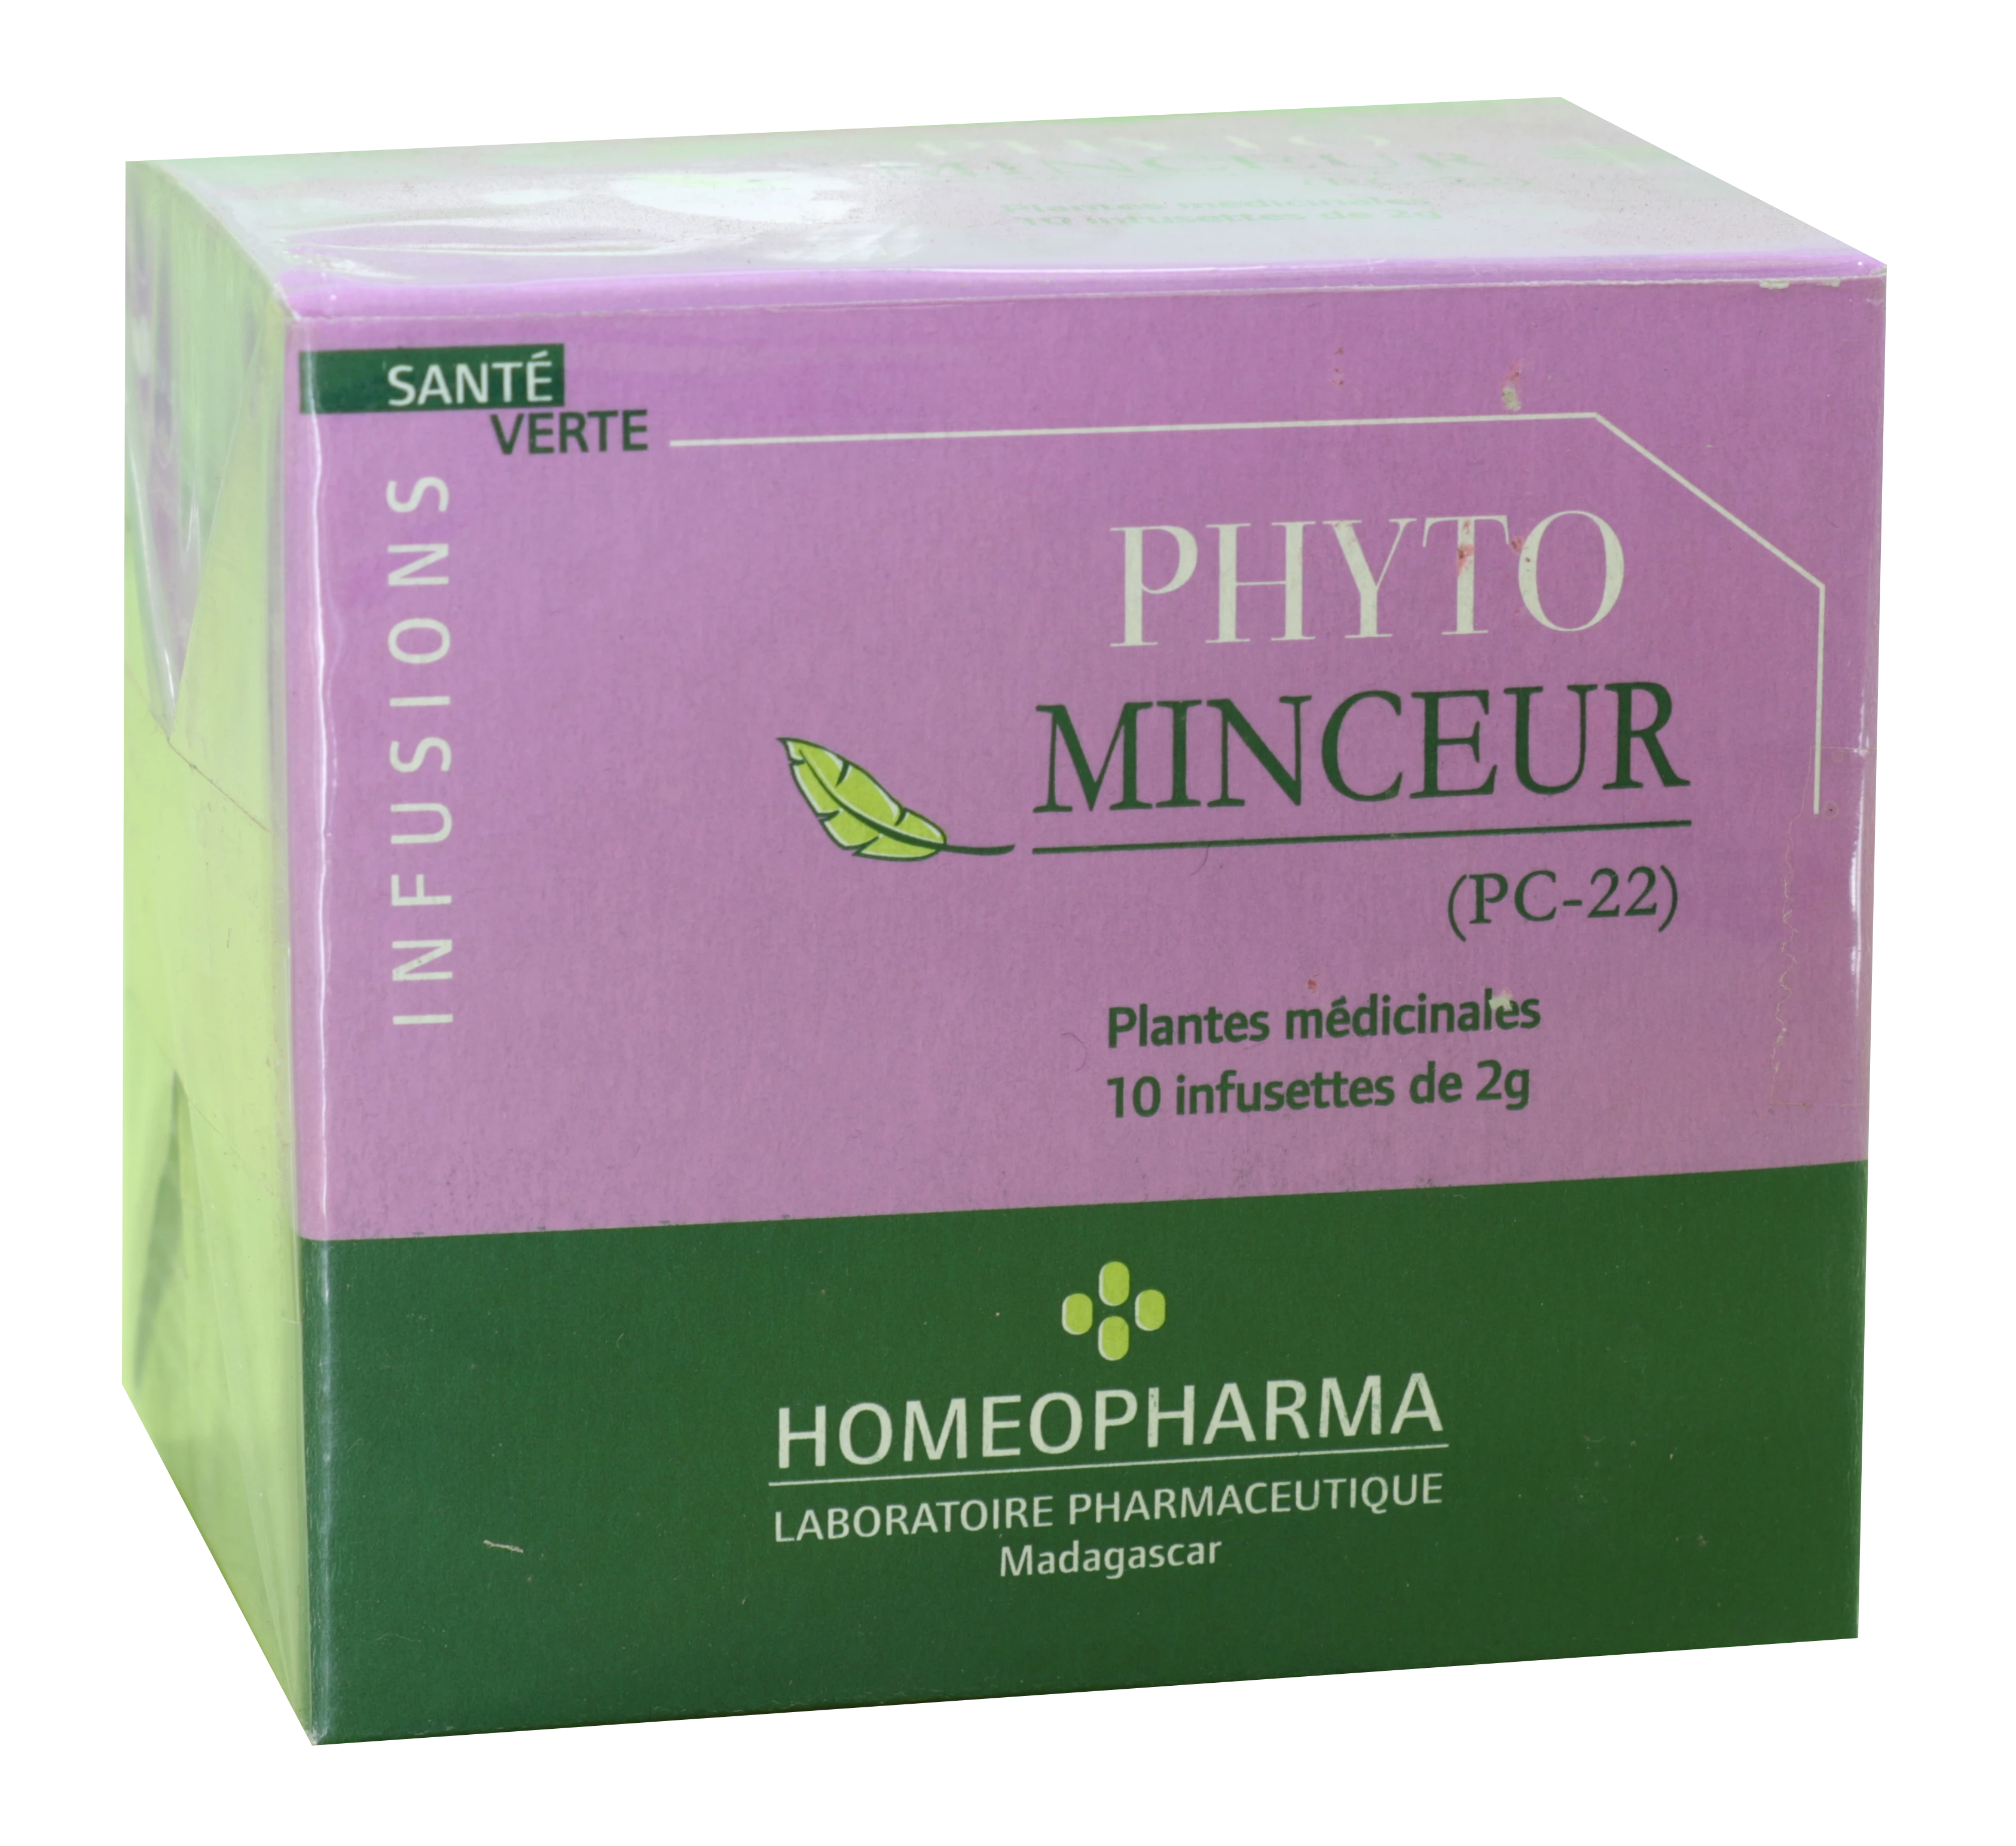 Traditionelle Phytotherapie Pc22-phyto-minceur Box 20 Infusetten - HOMEOPHARMA